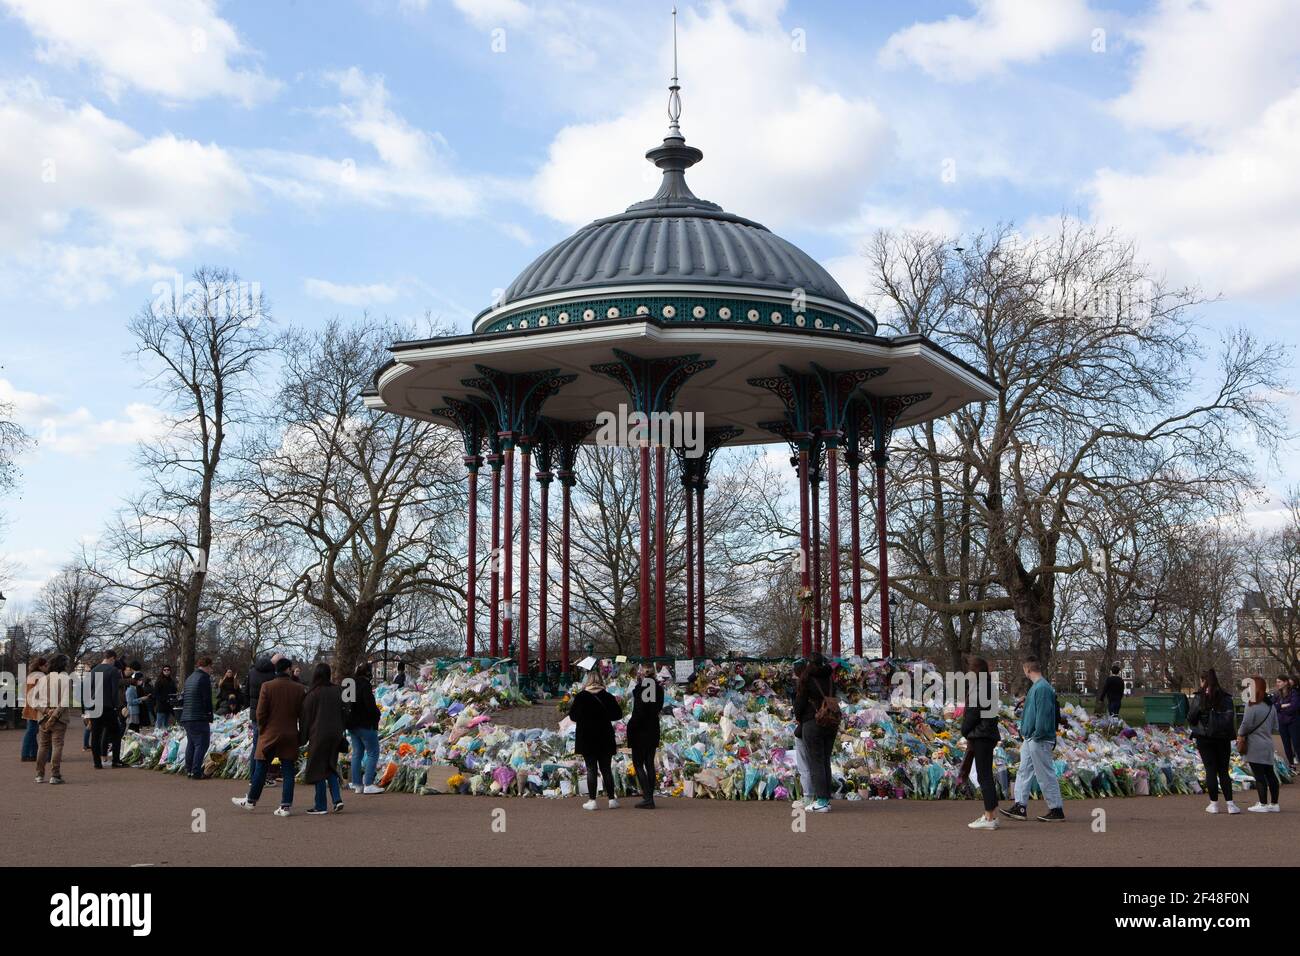 London, UK, 19 March 2021: Clapham Common bandstand and the surrounding trees and benches are home to an ever-growing shrine of flowers, candles and messages in memory of Sarah Everard. Some are personal and sad, others are angry and speak of the high numbers of women killed each year by men. Last week the Metropolitan Police broke up a vigil at the site. Anna Watson/Alamy Live News Stock Photo